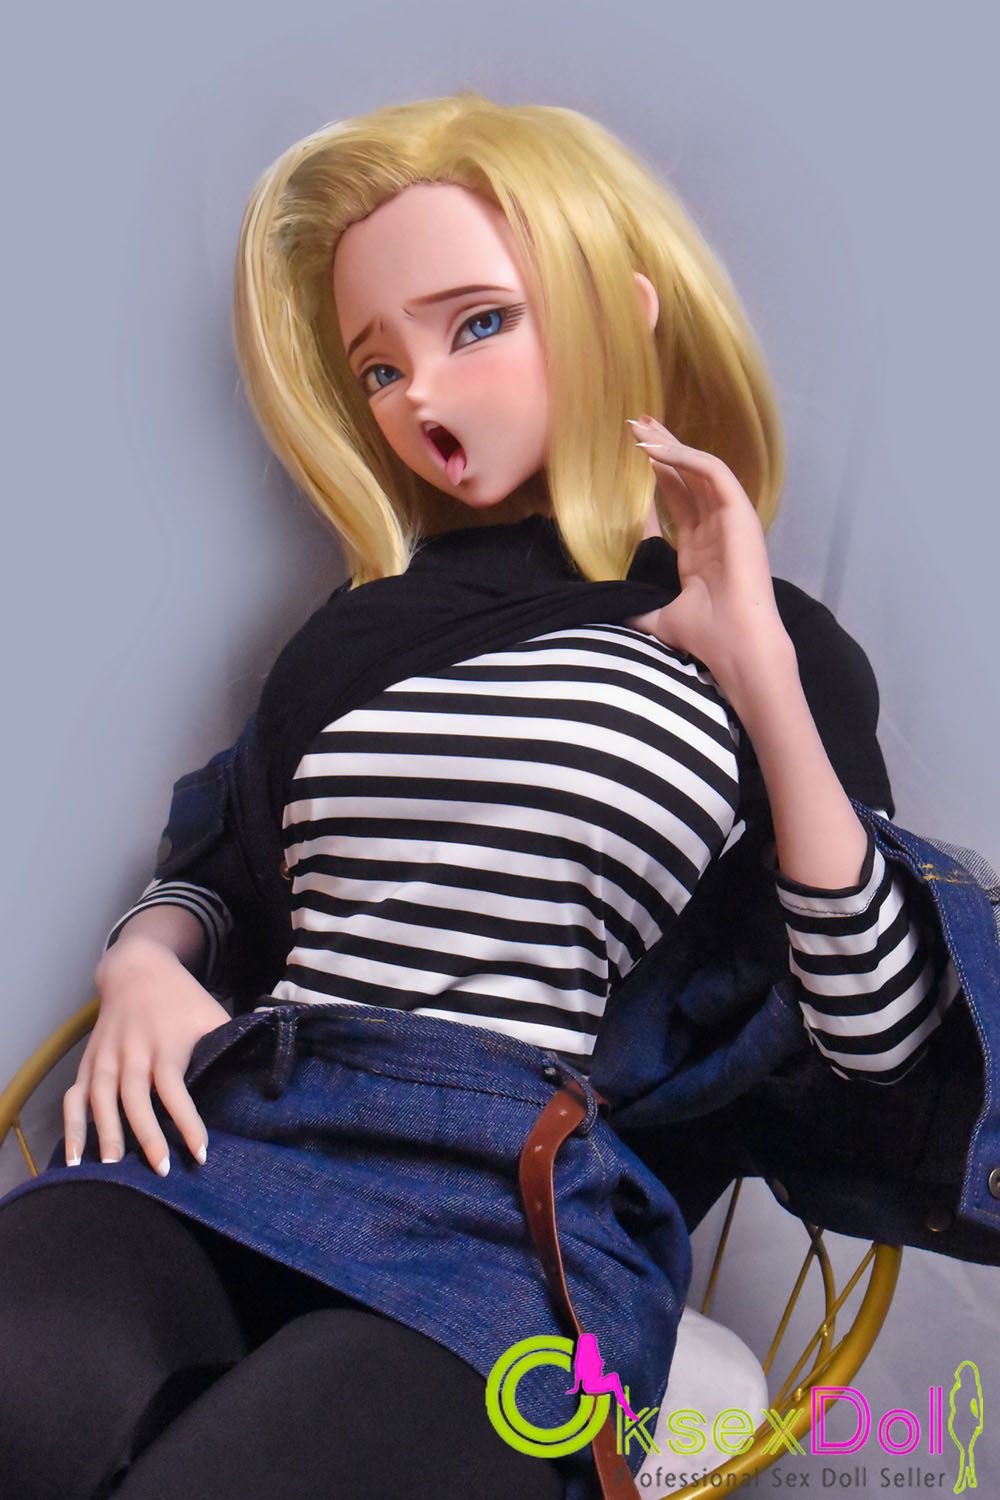 FU 158cm Real Dolls Pictures